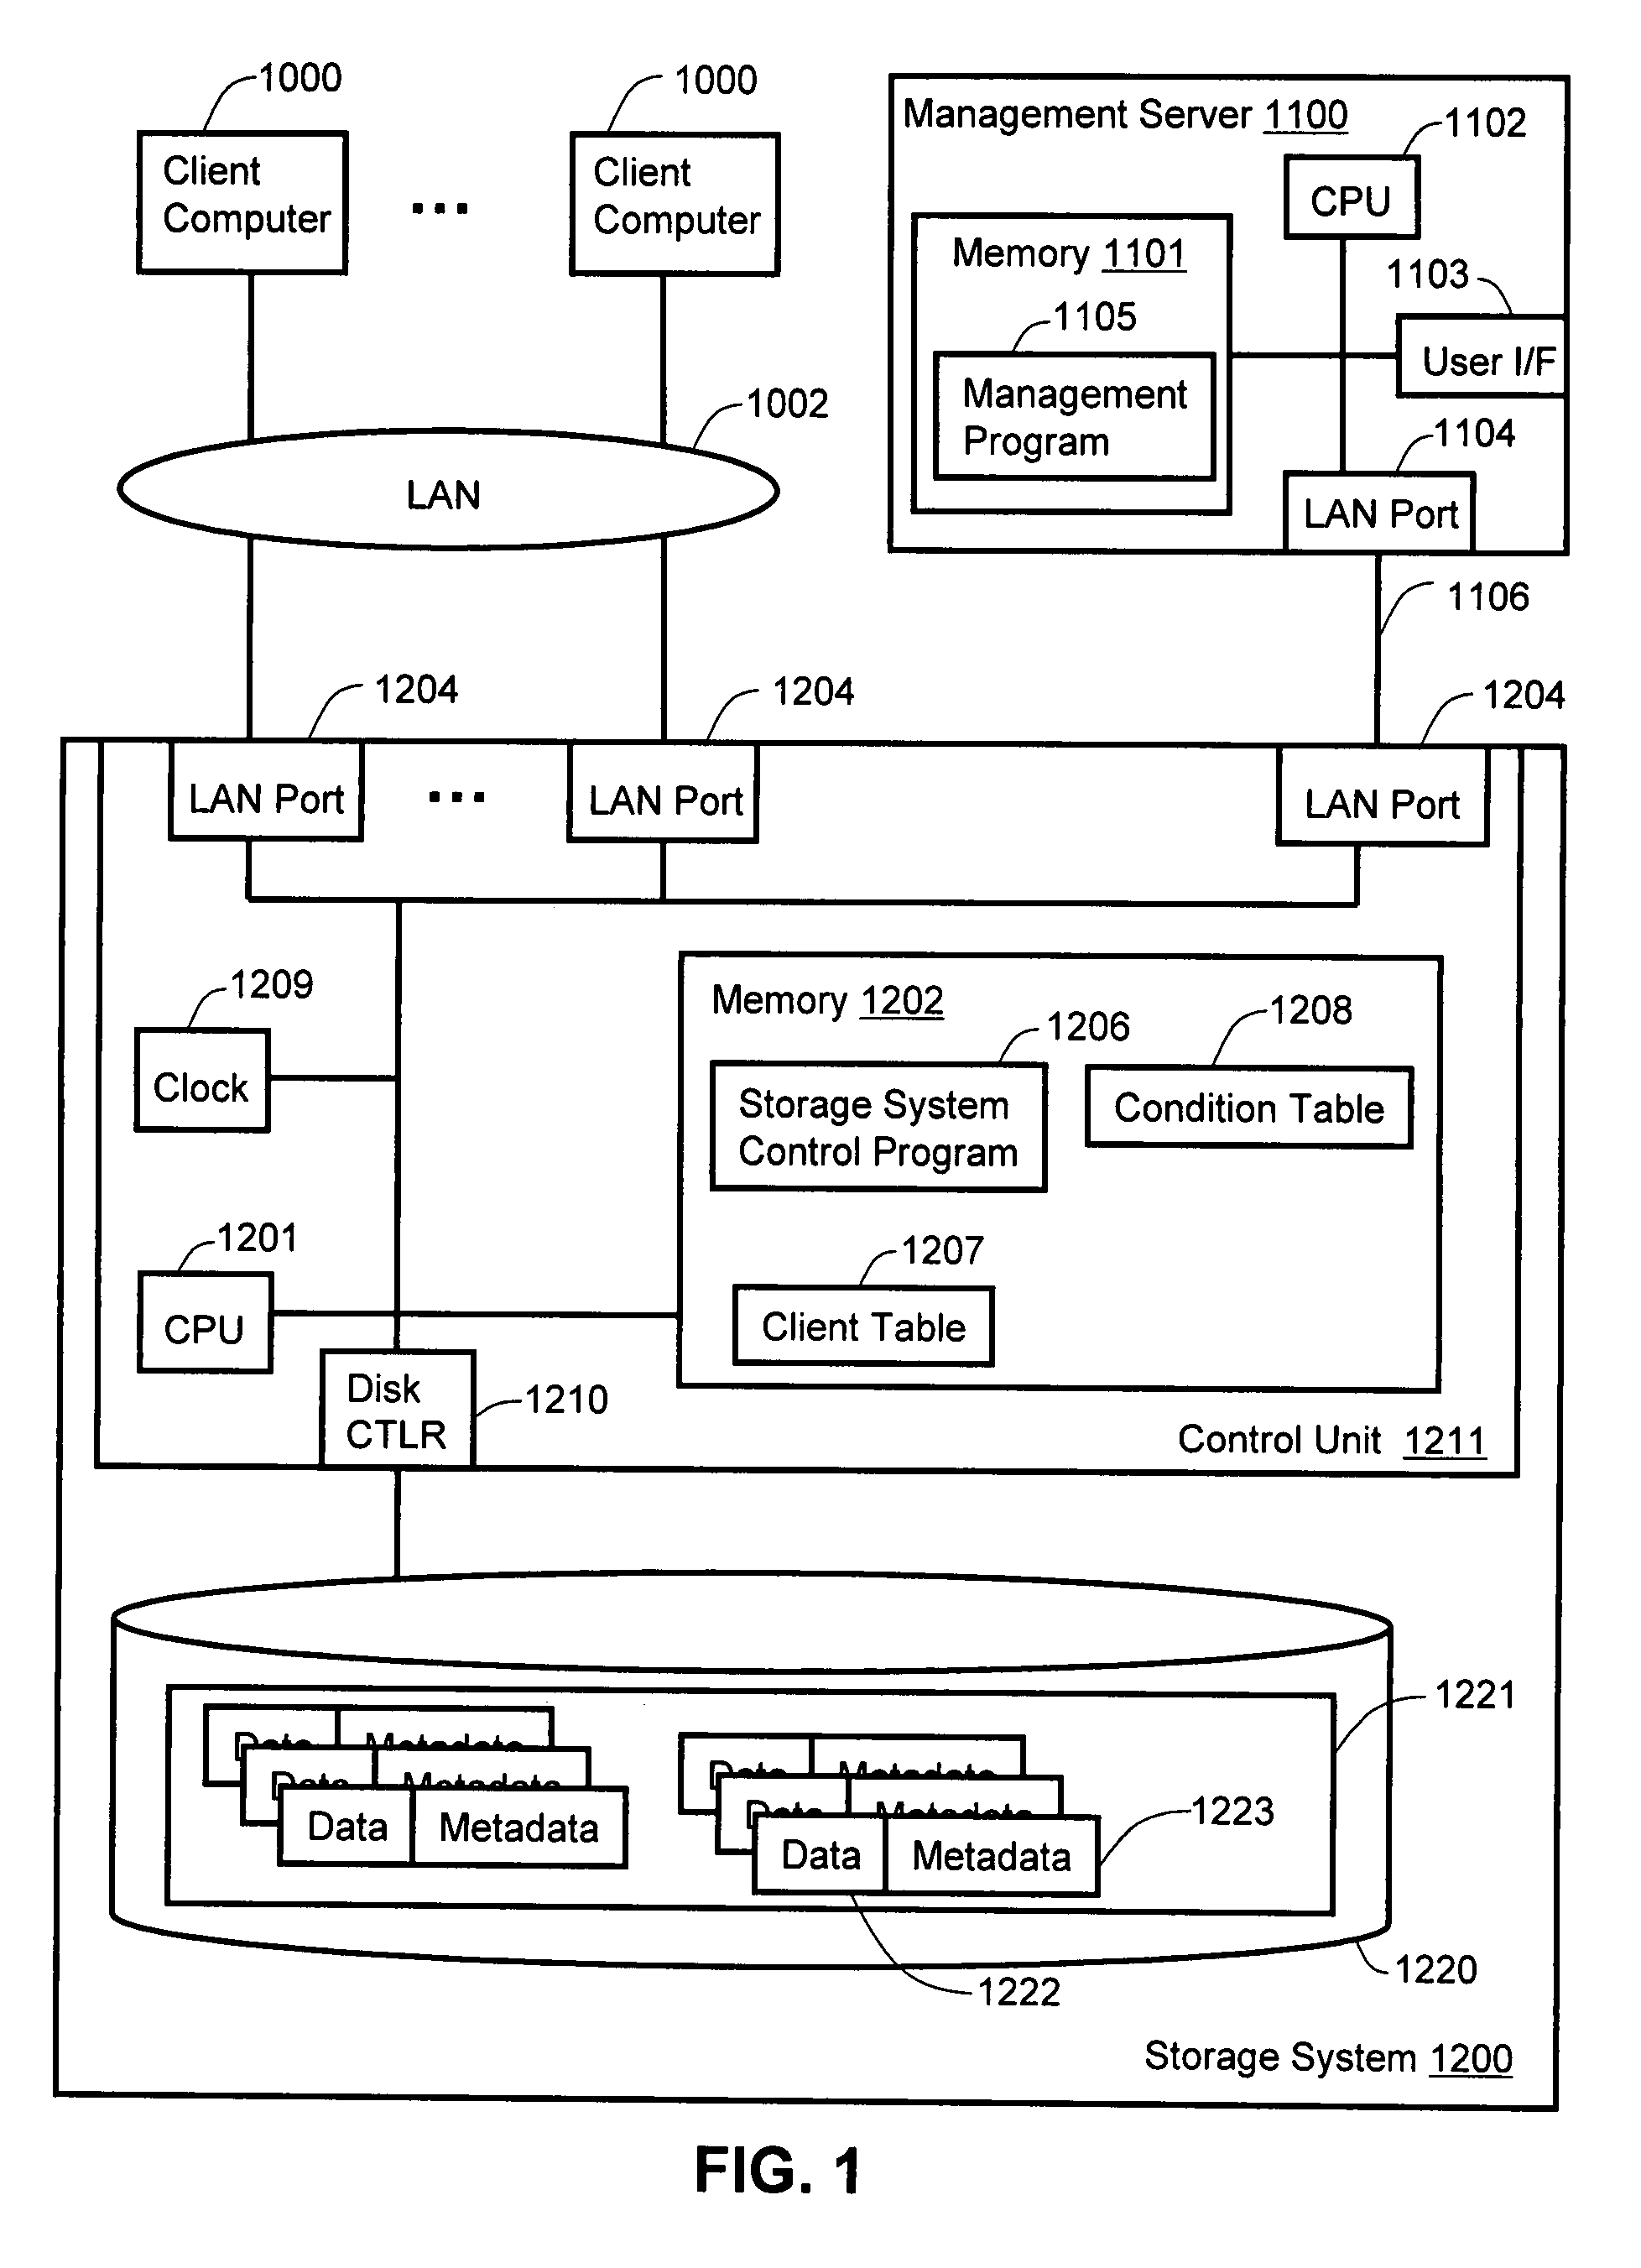 Method and apparatus for managing data compression and integrity in a computer storage system